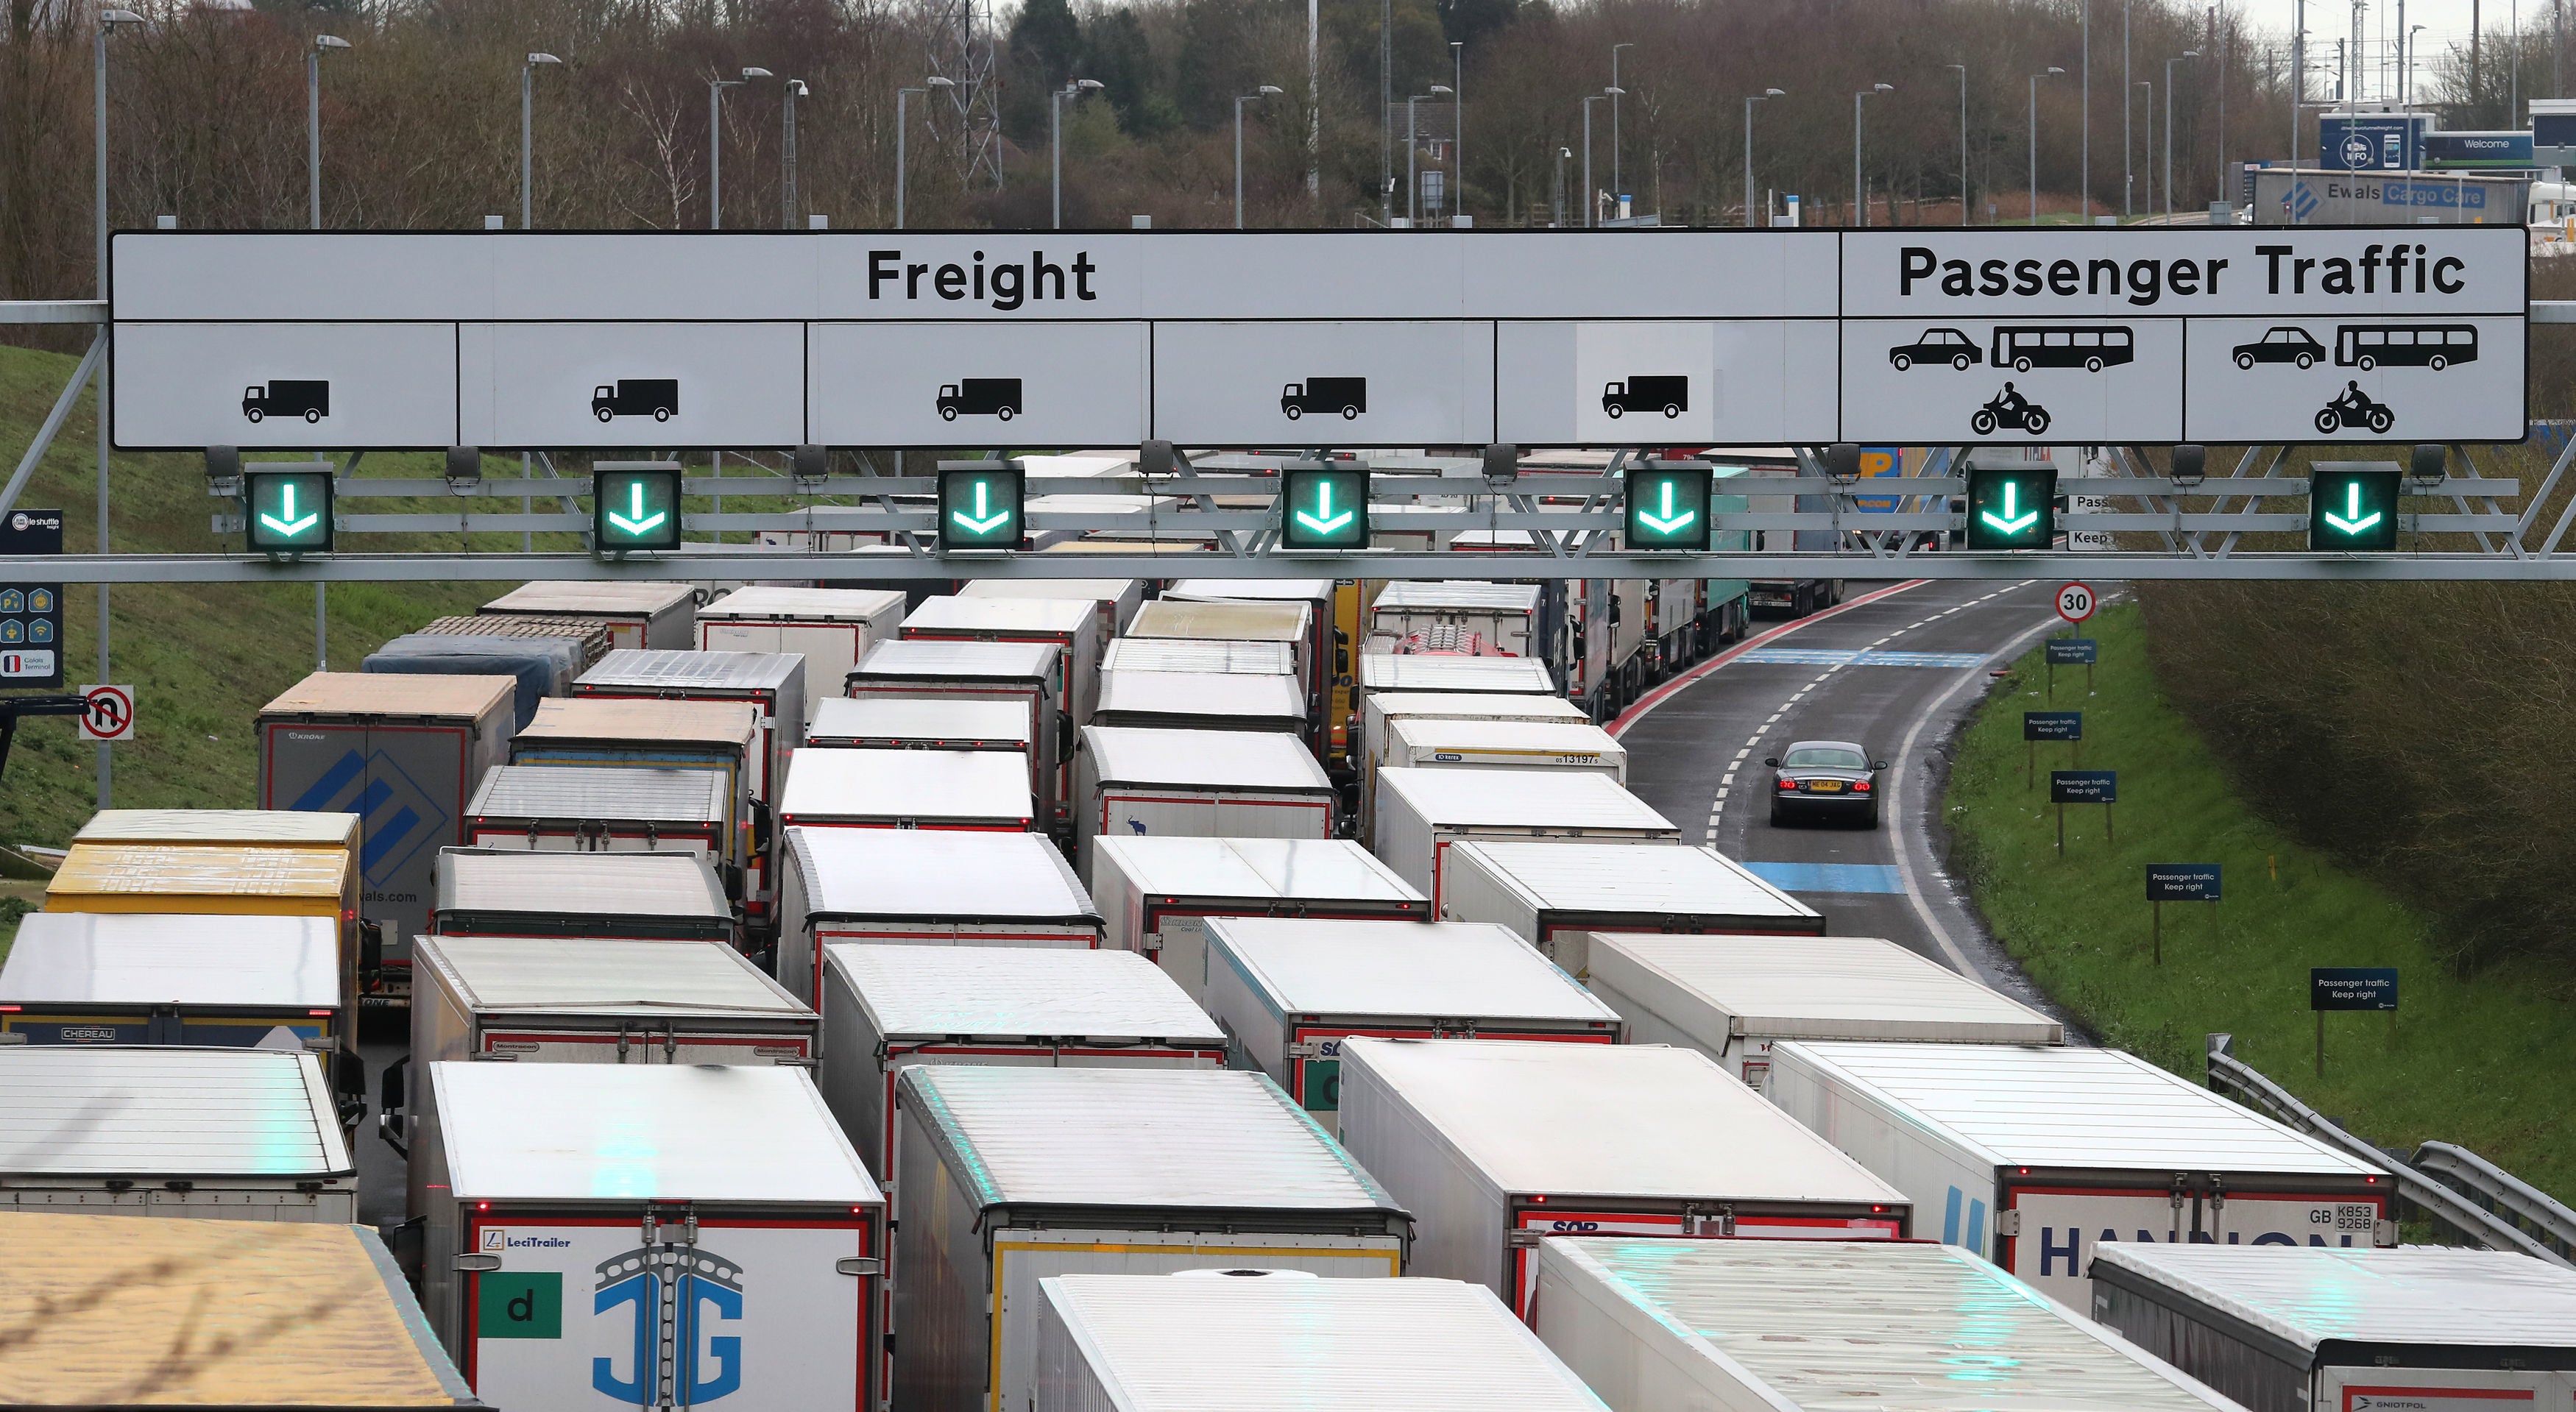 Lorries queue to enter the Eurotunnel site in Folkestone, Kent, due to heavy freight traffic on 18 December 2020.